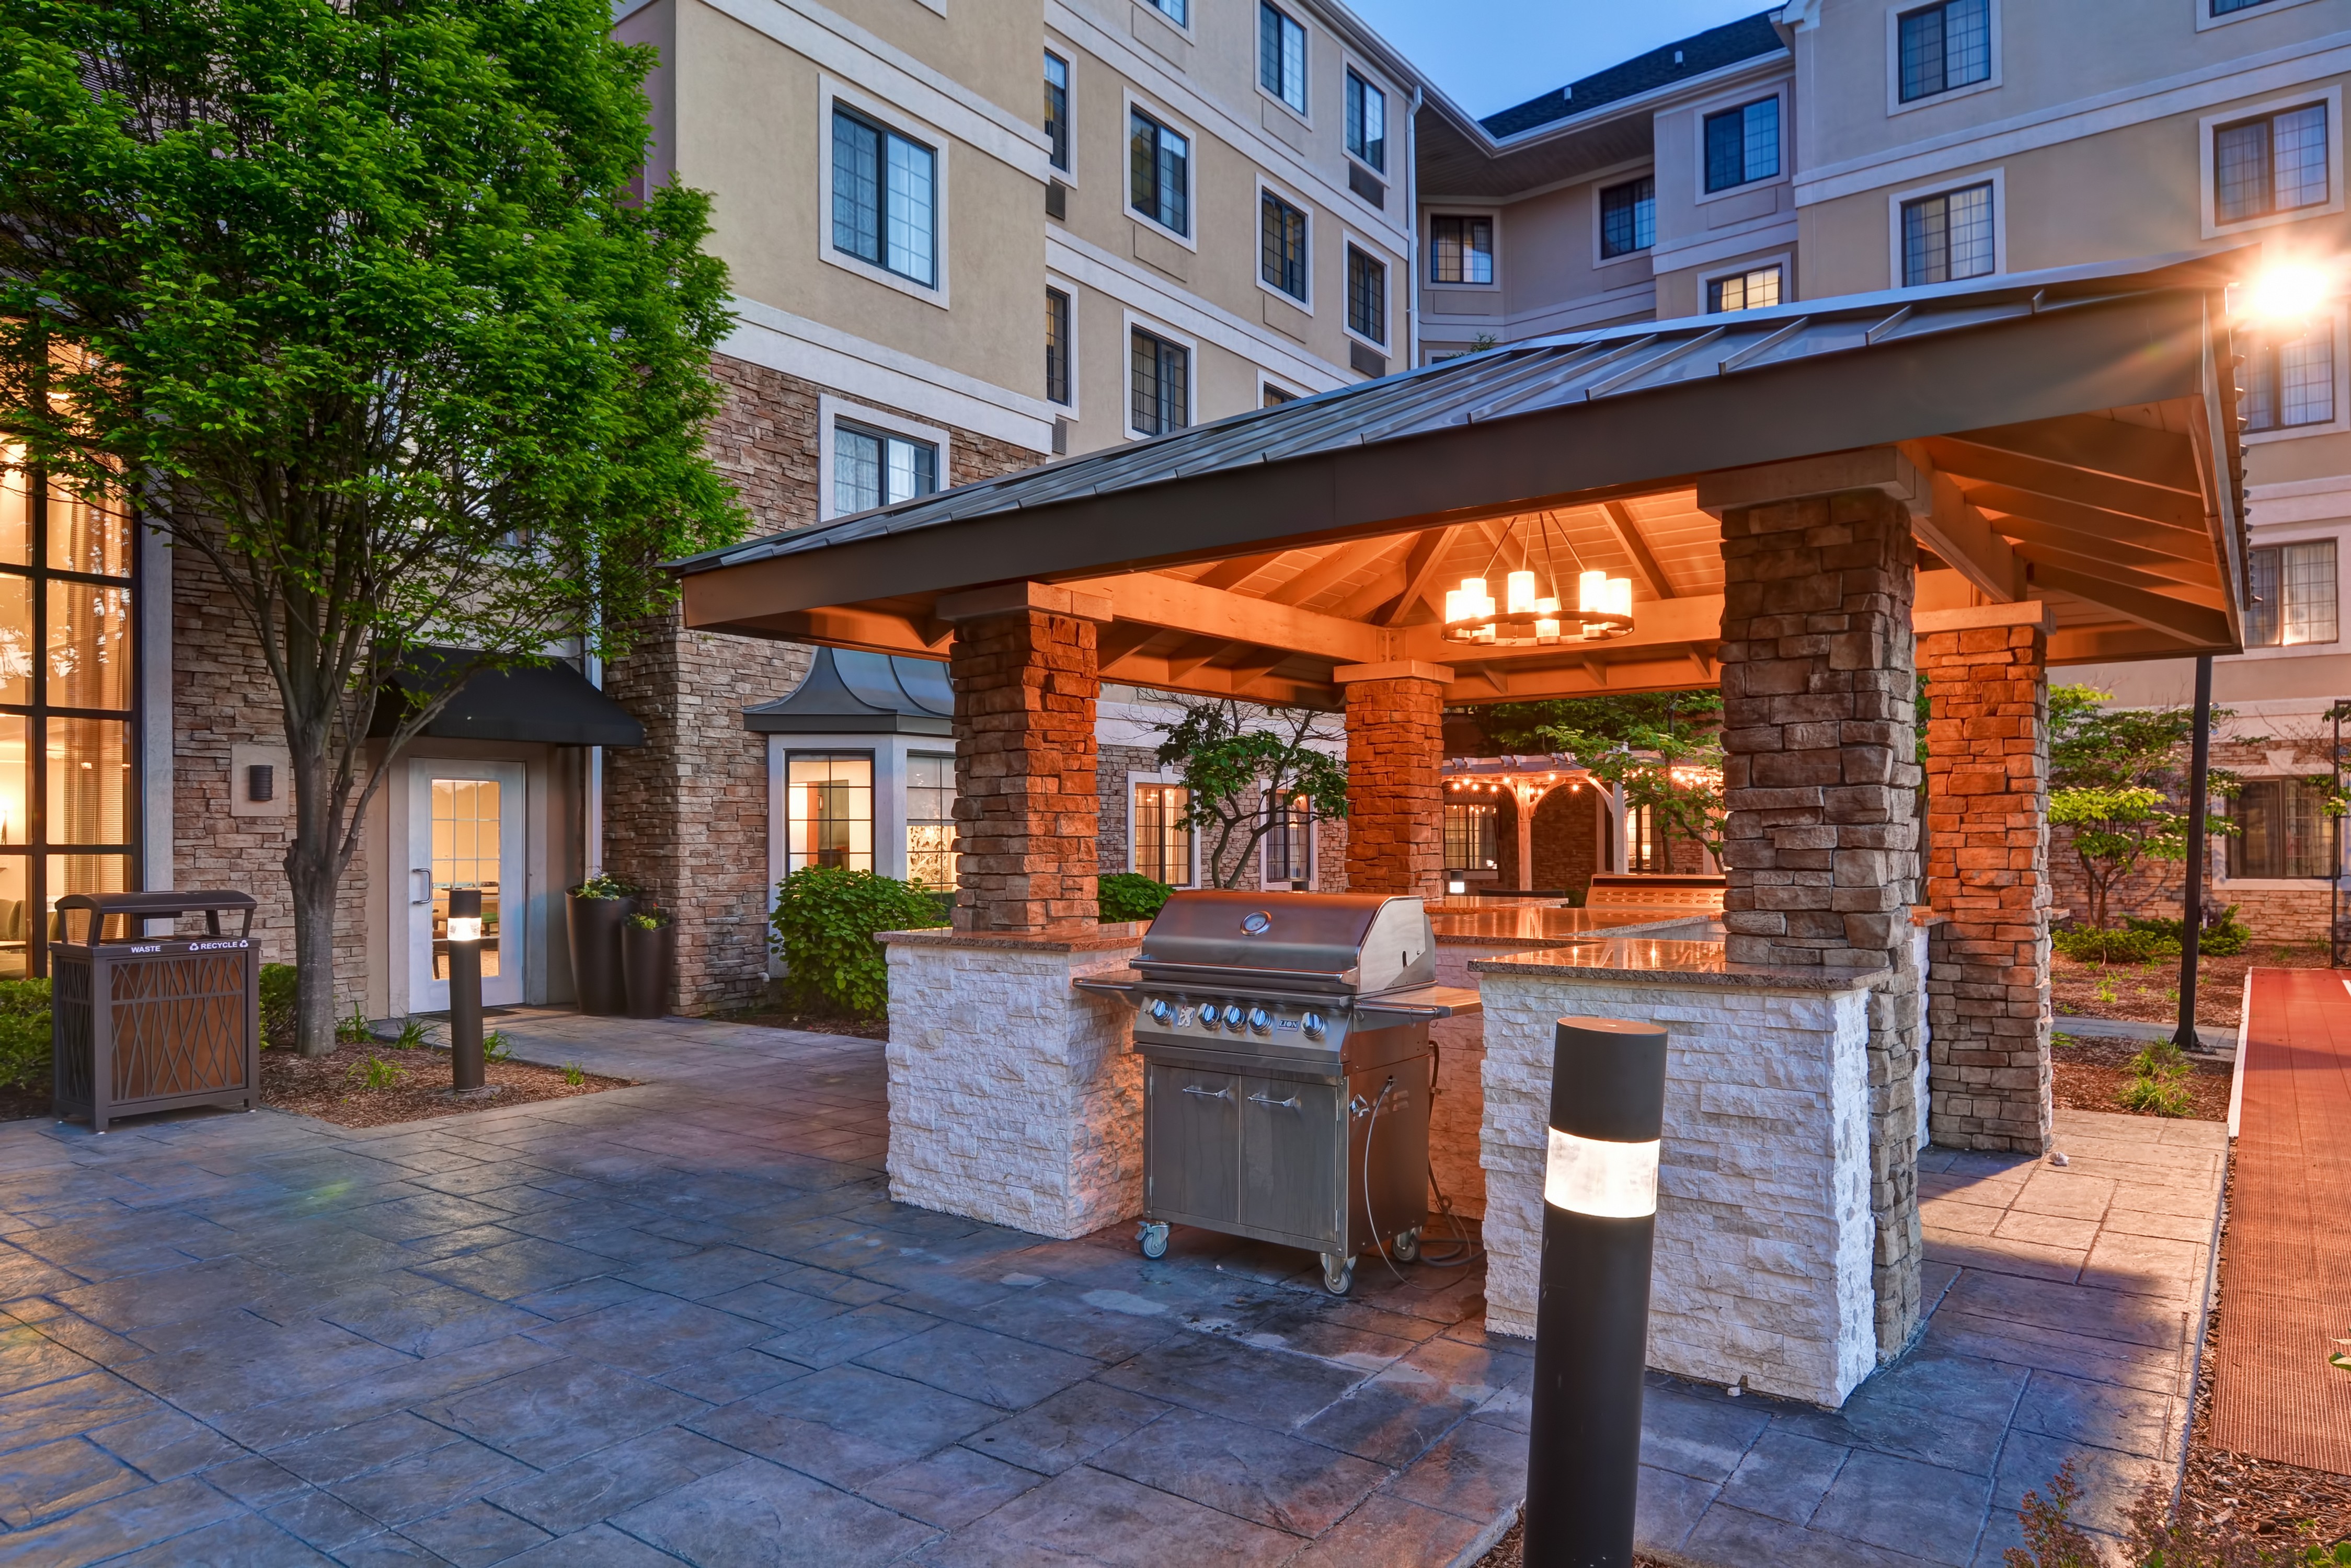 Outdoor Patio and Grill